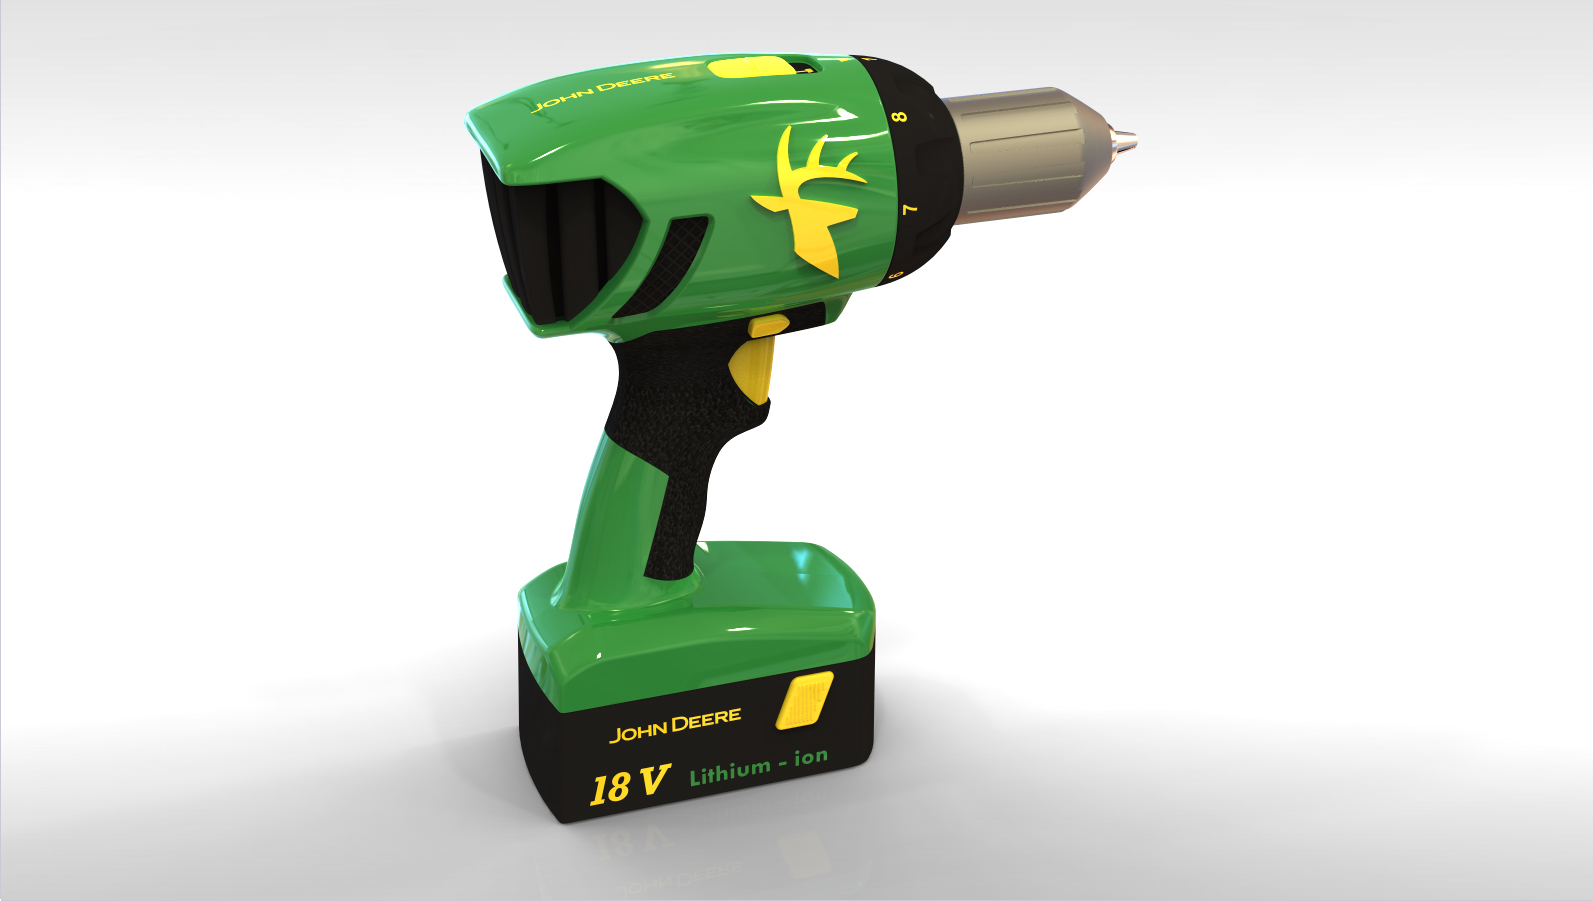 John Deere Cordless Power Drill by Marcus Lundberg at ...